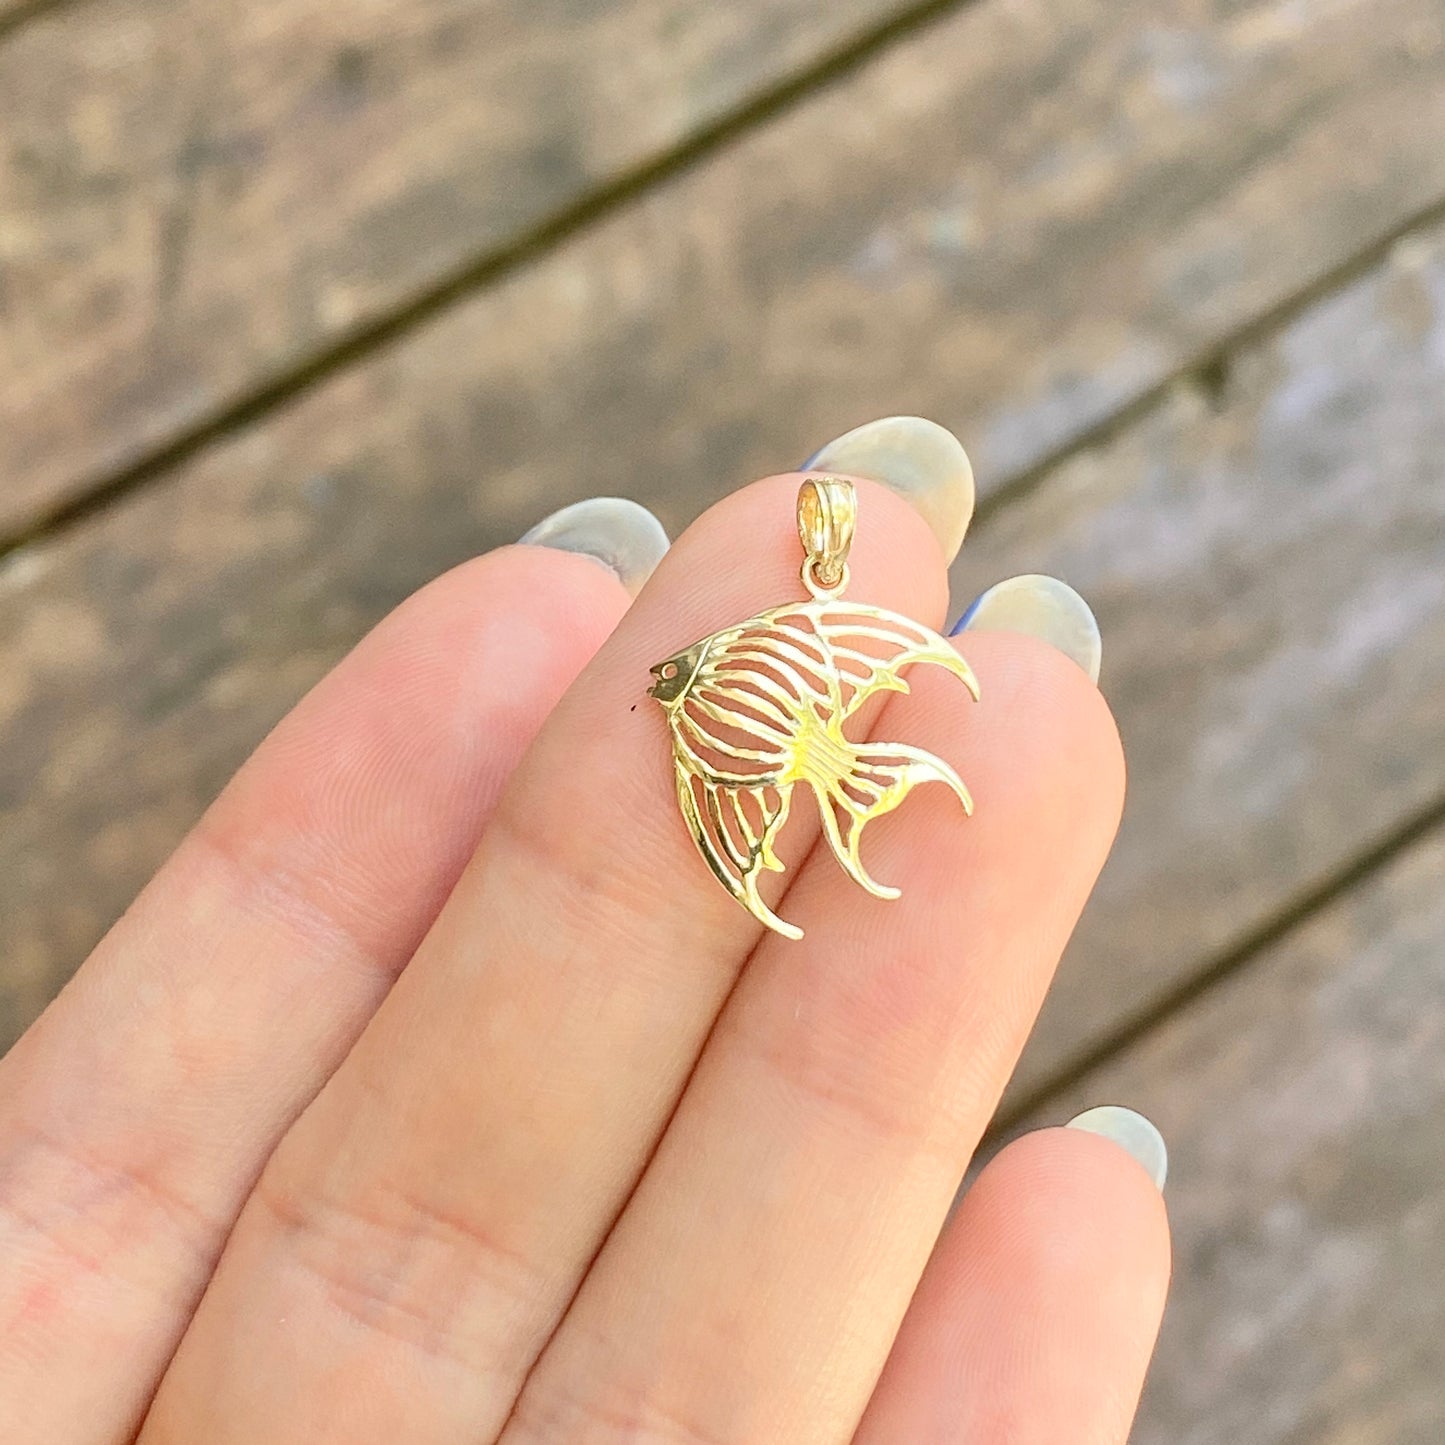 10KT Yellow Gold Polished Cut-Out Angelfish Pendant Charm, 10KT Yellow Gold Polished Cut-Out Angelfish Pendant Charm - Legacy Saint Jewelry